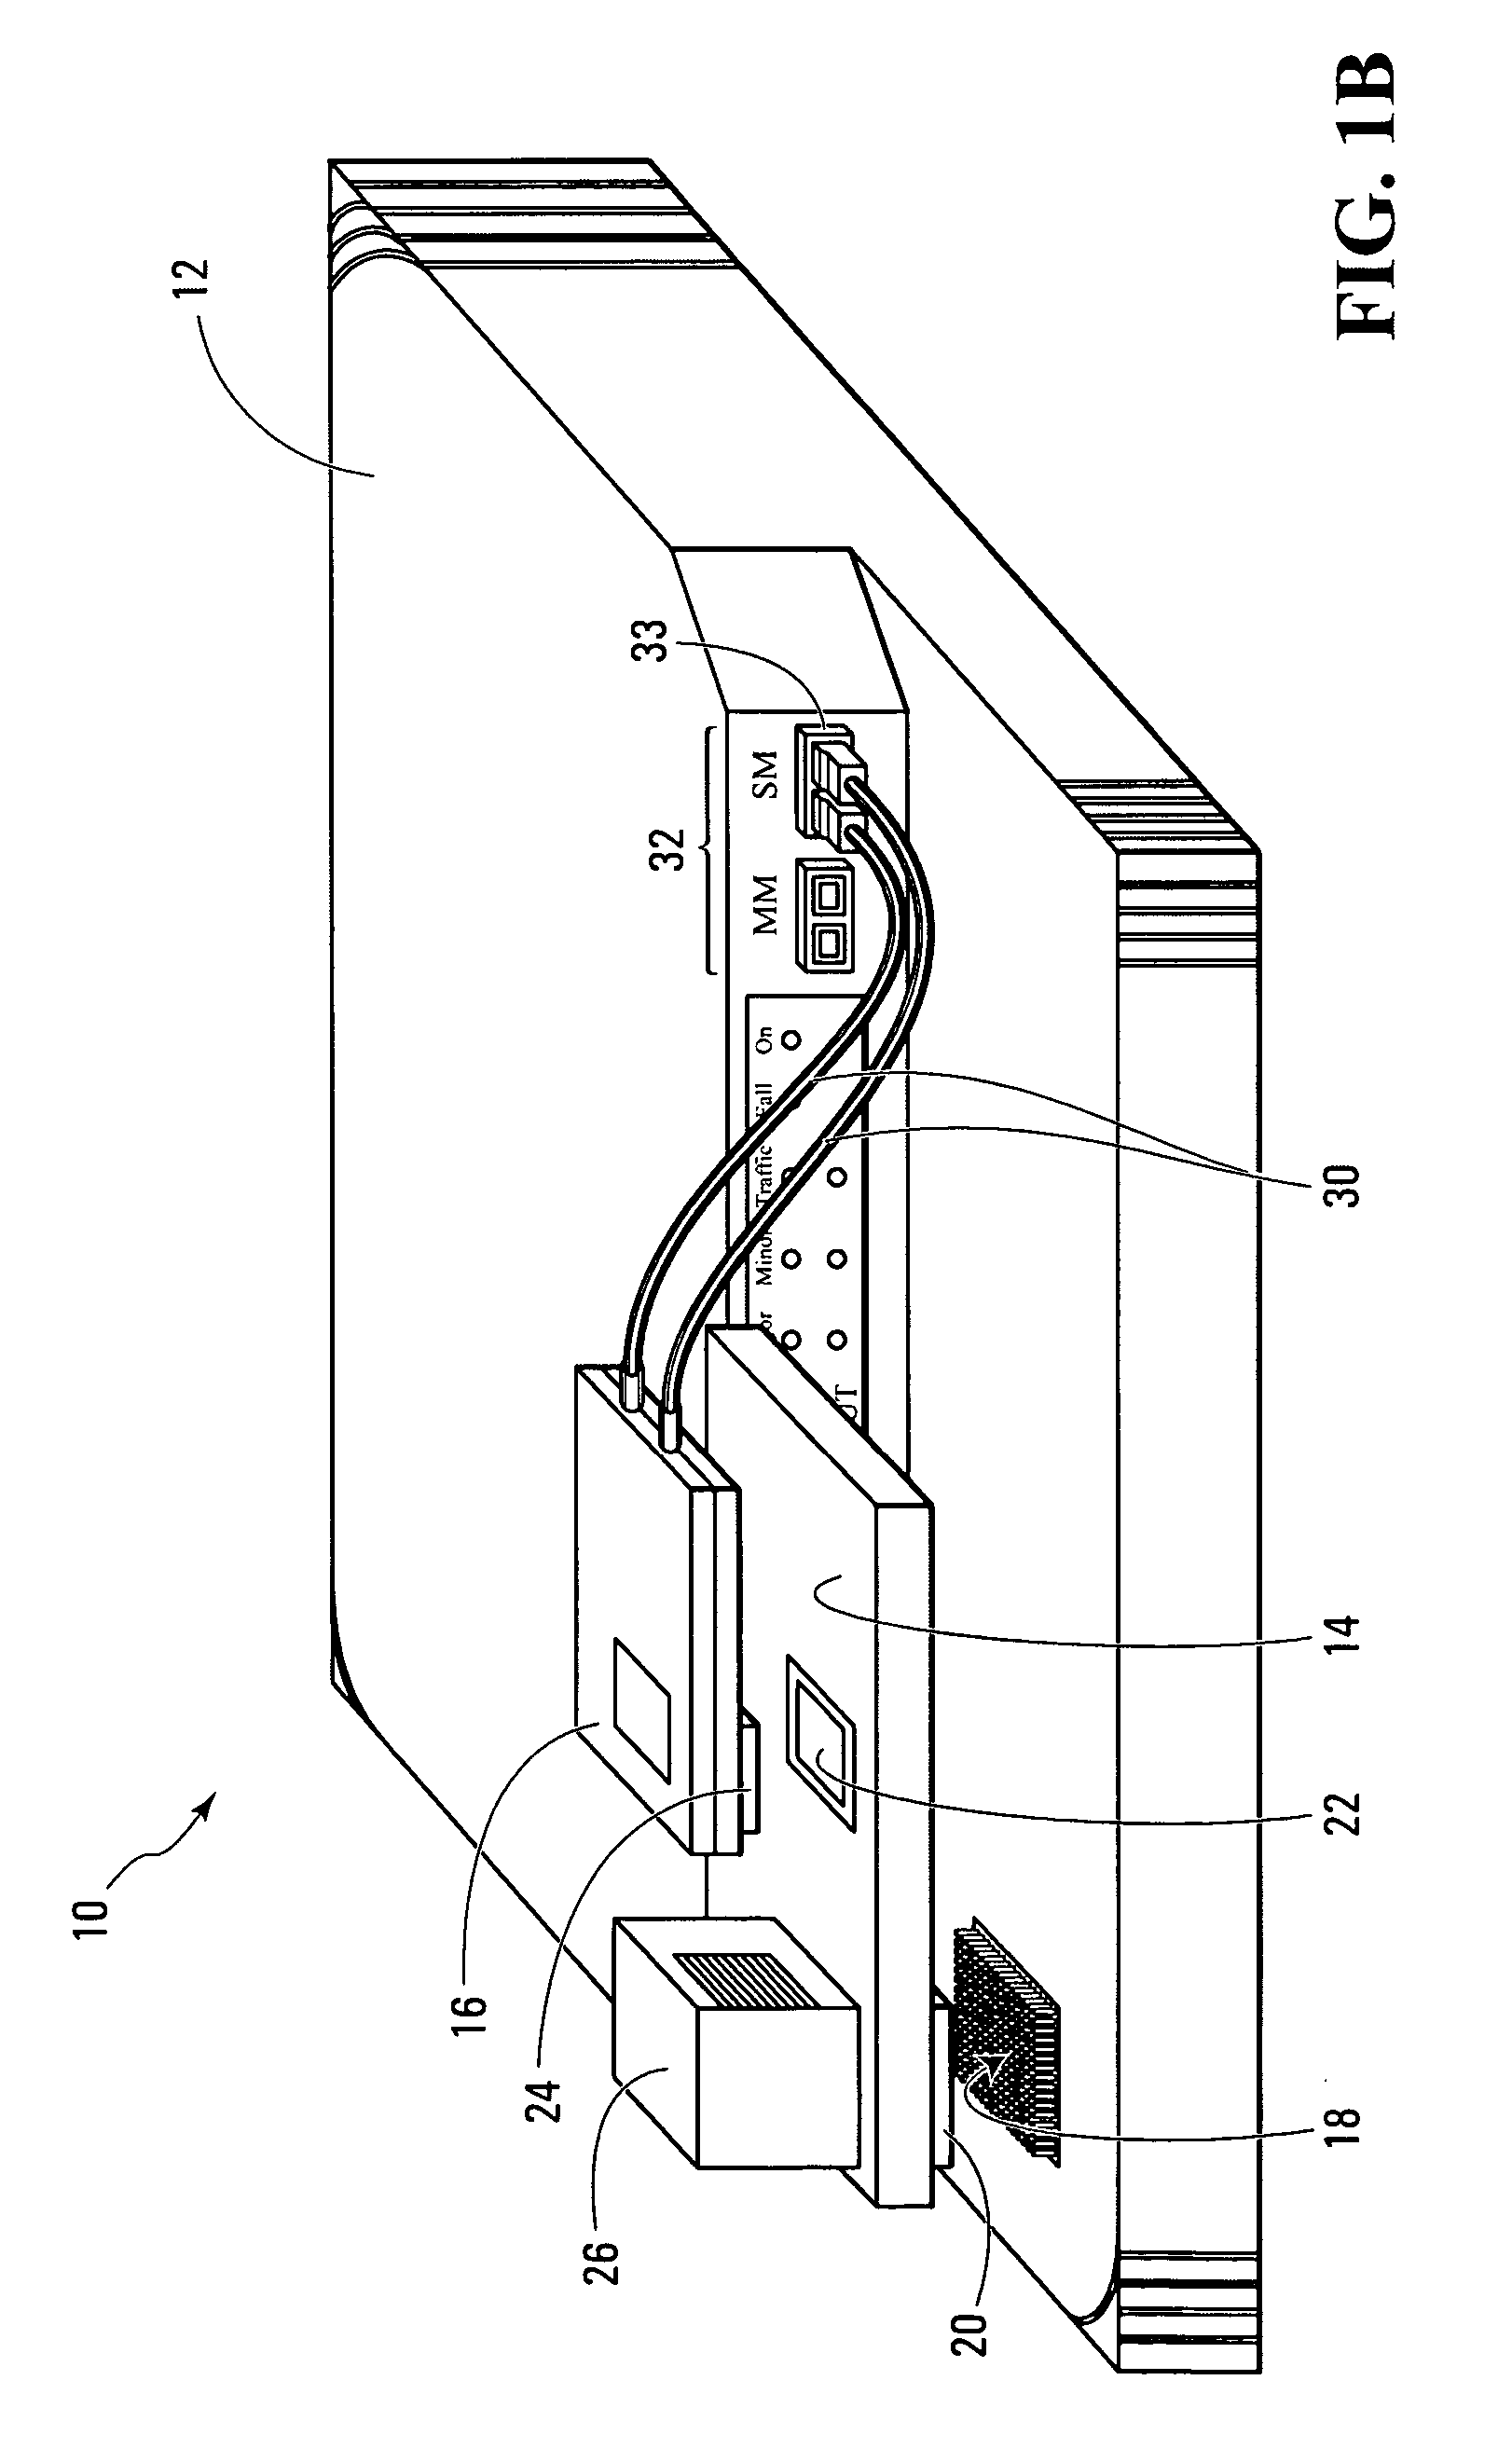 MSA transceiver testing device and interface for use therewith